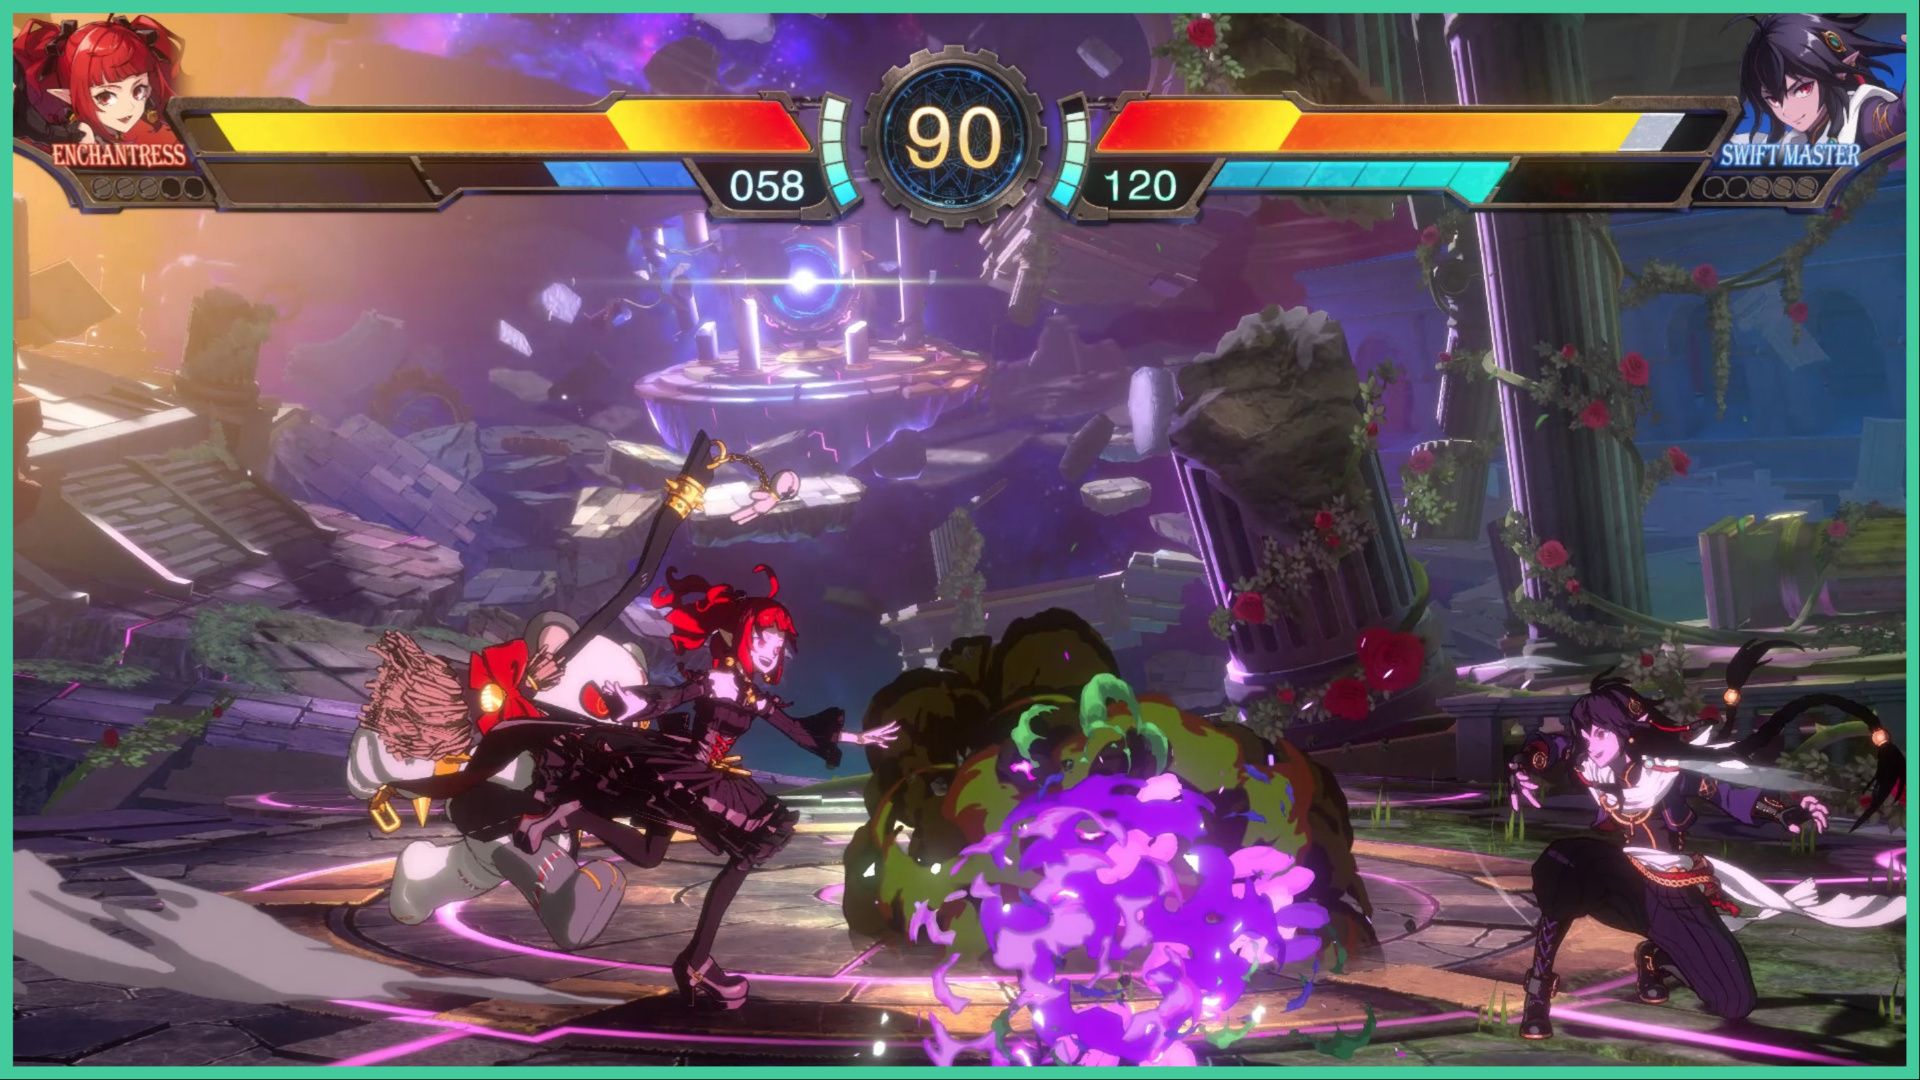 feature image for our dnf duel tier list, which is of a screenshot of a battle between enchantress and swift master as they stand on a platform surrounded by floating stone debris, enchantress's bear is also sprinting toward swift master as a large explosion appears on the ground between the two characters